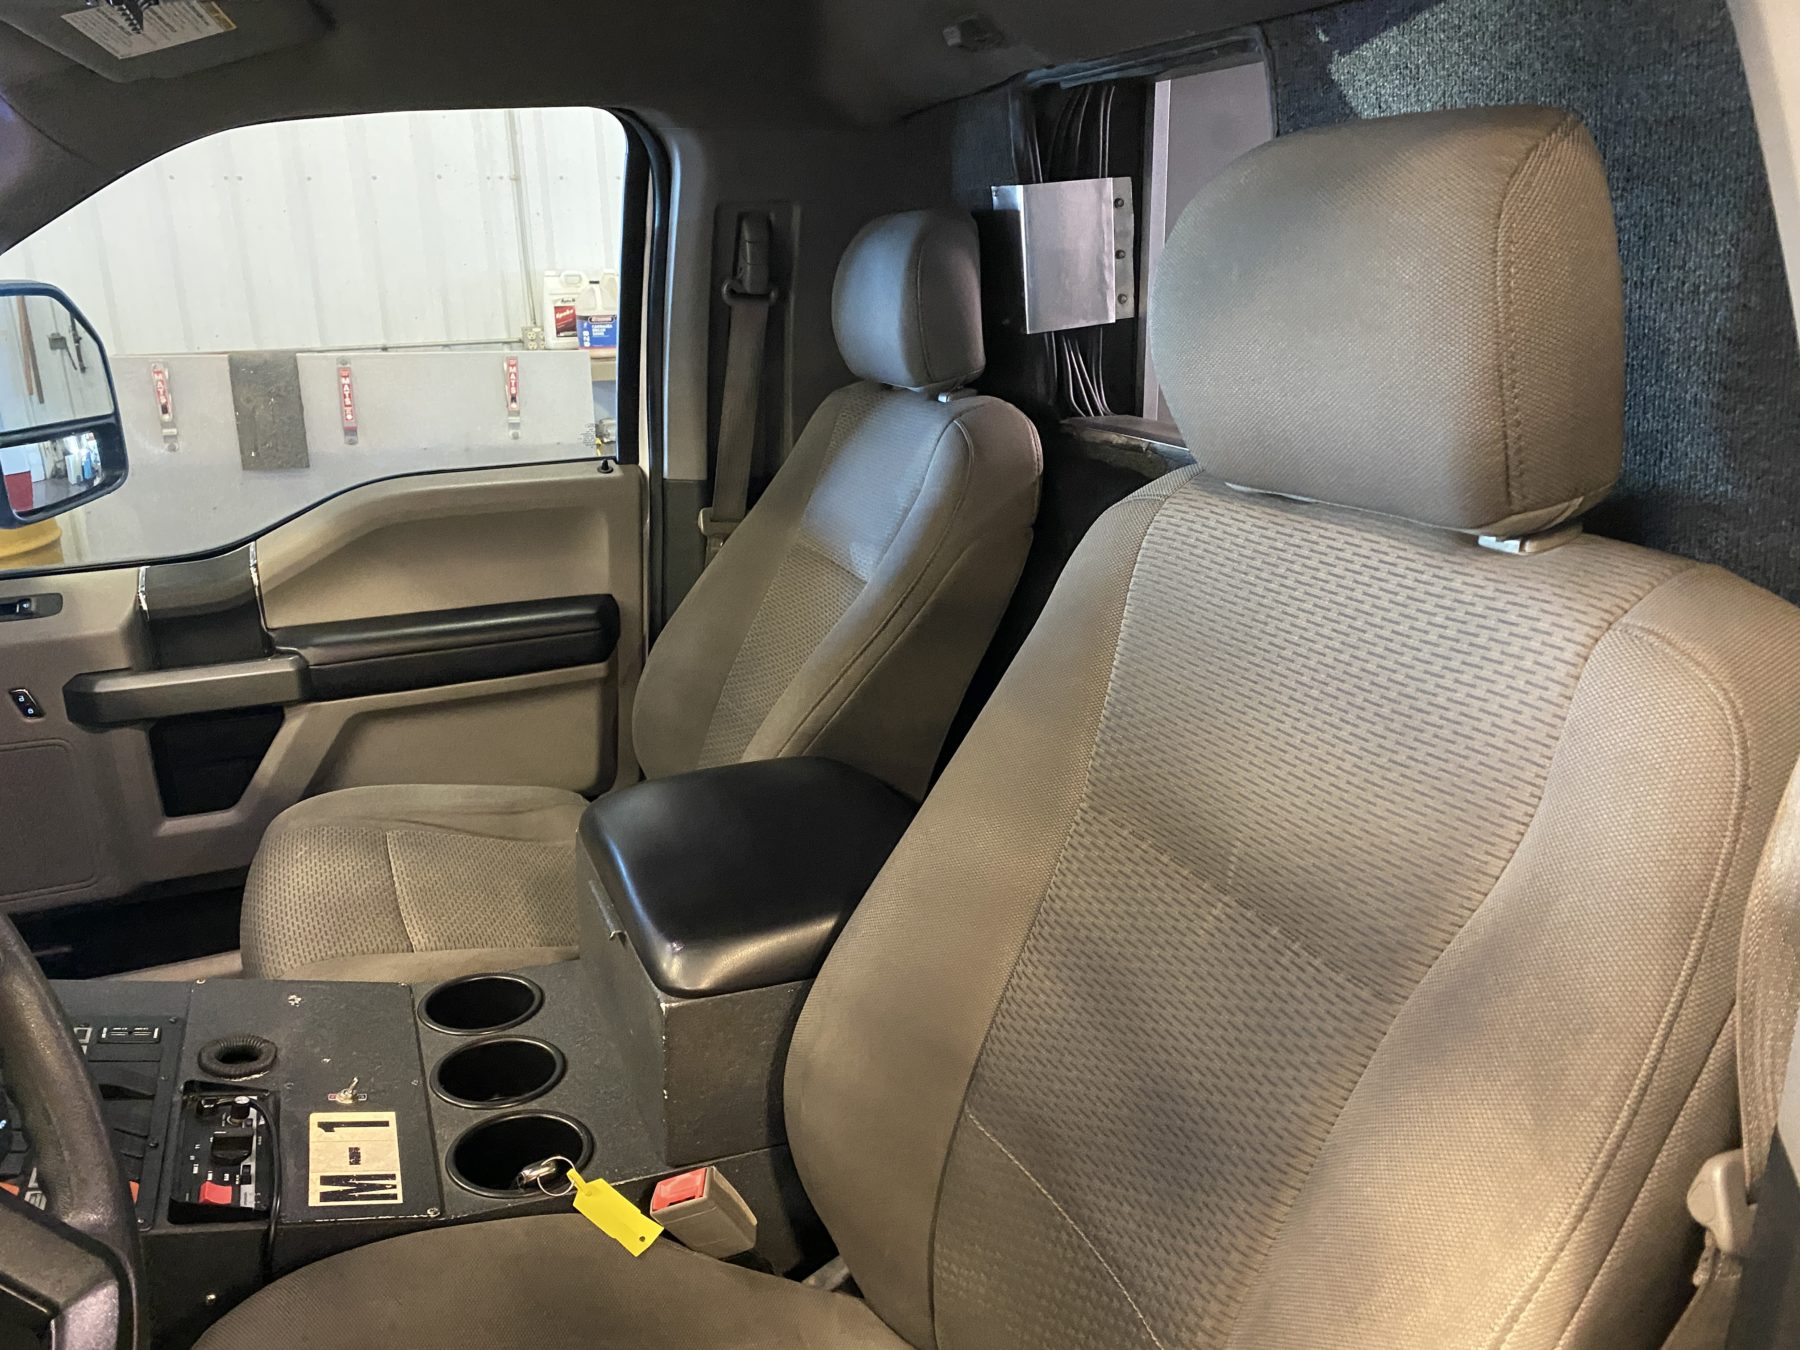 2019 Ford F450 4x4 Heavy Duty Ambulance For Sale – Picture 11